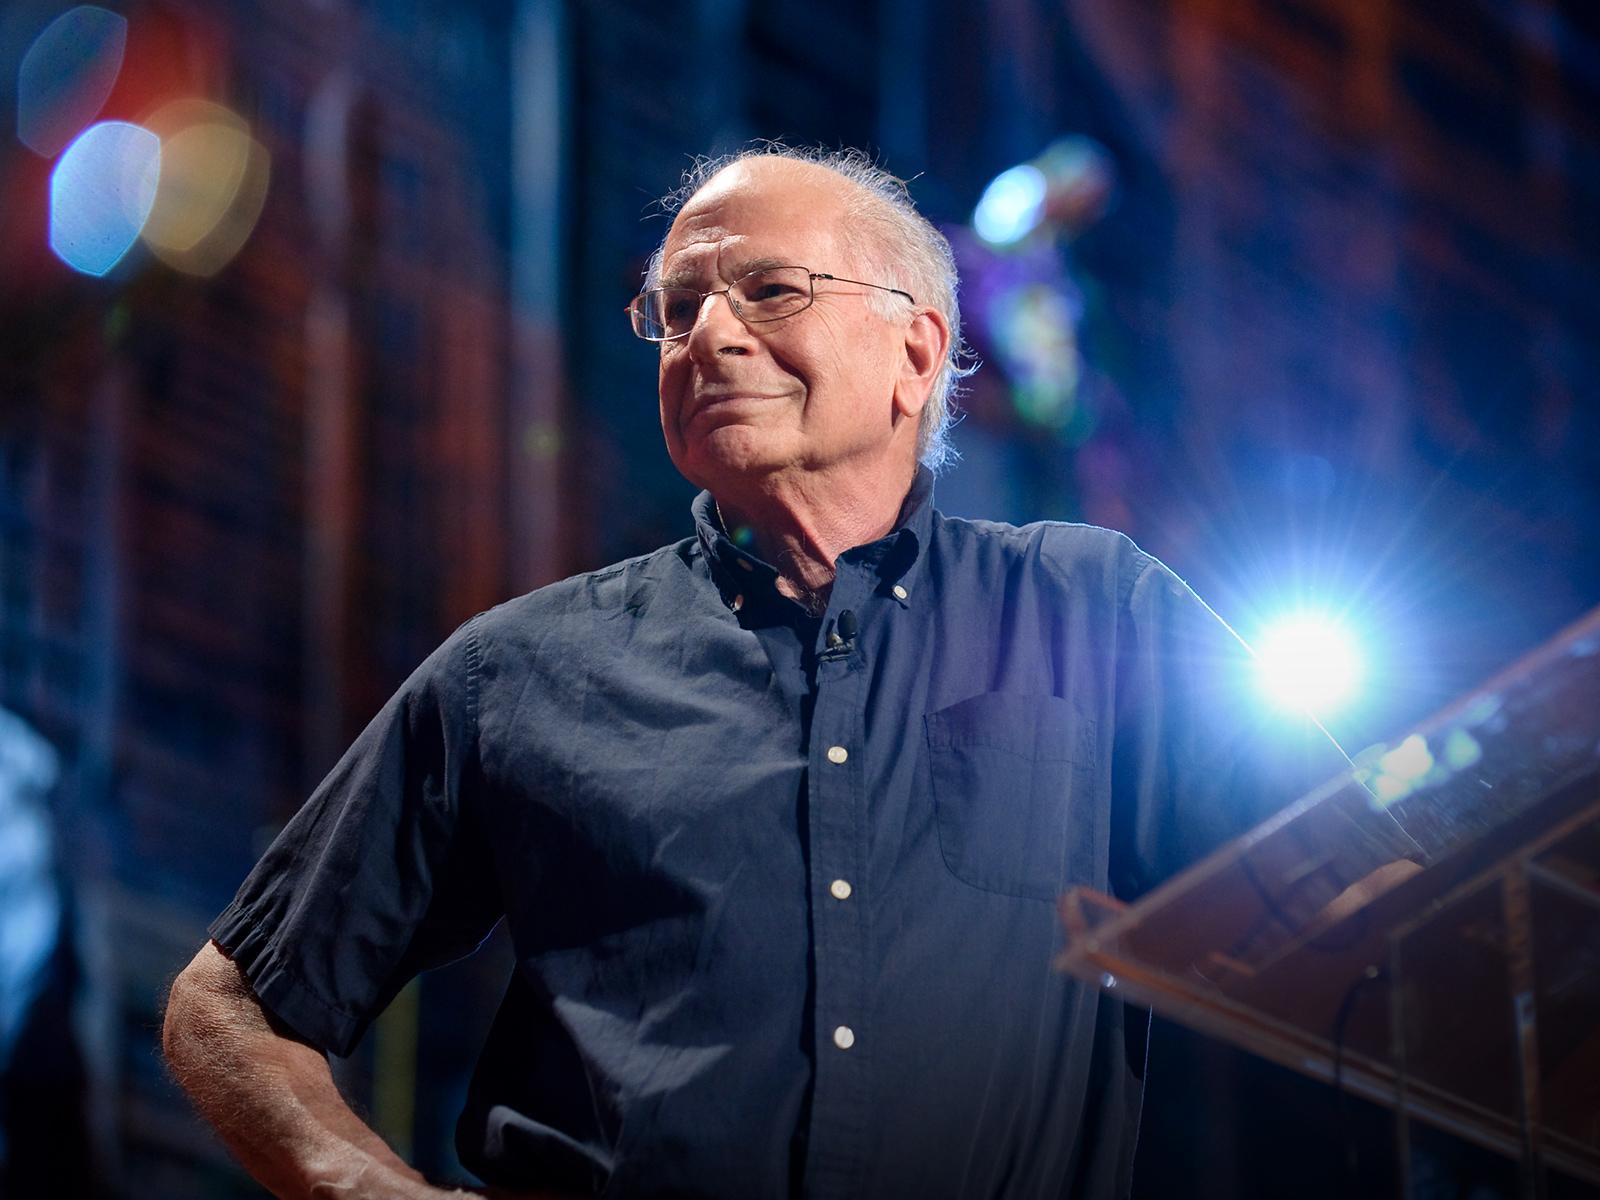 Daniel Kahneman: The riddle of experience vs. memory